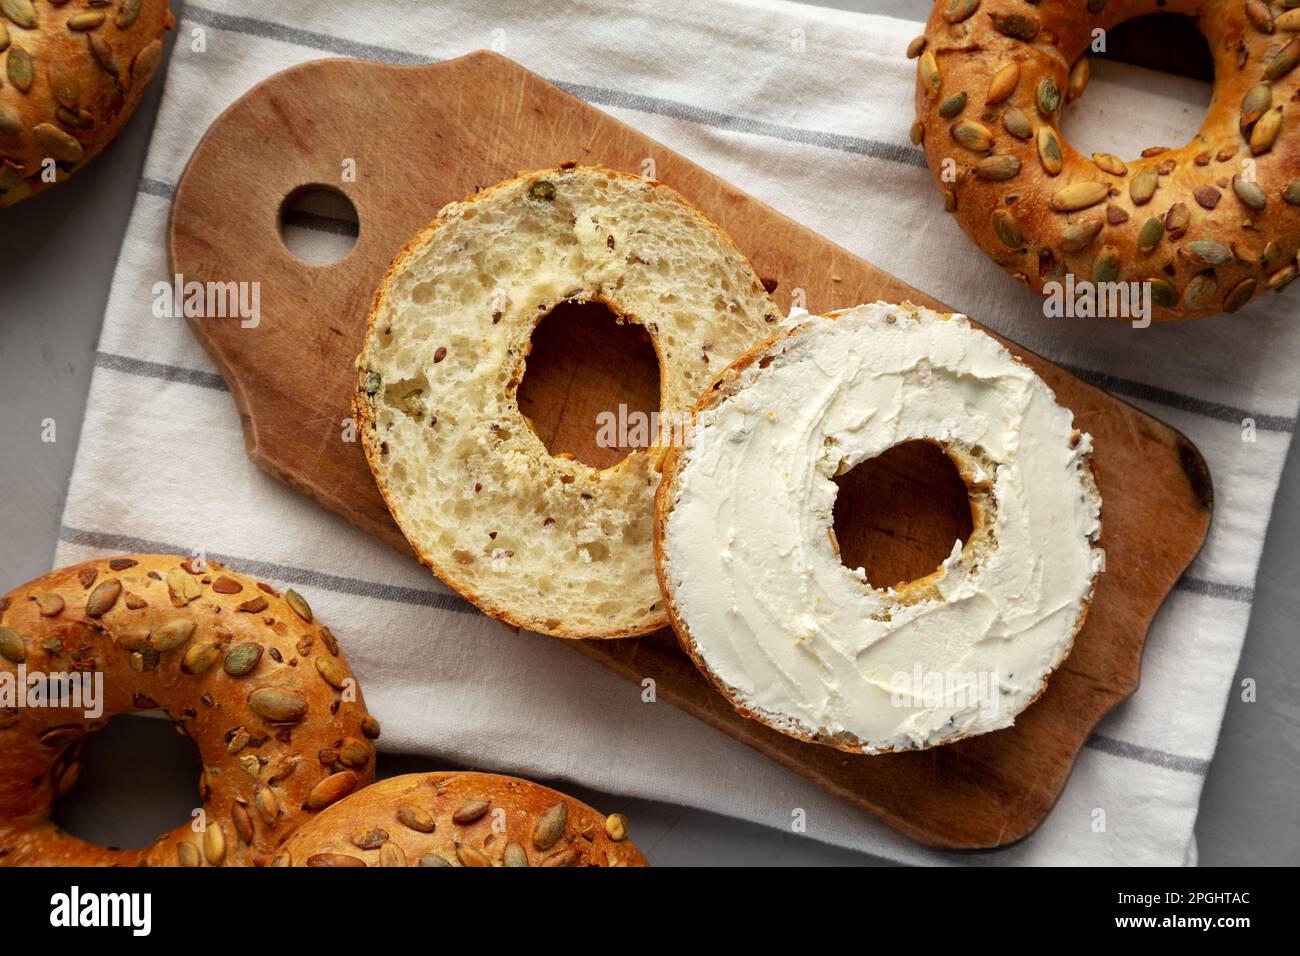 Homemade Whole Grain Bagel with Cream Cheese on a rustic wooden board, top view. Stock Photo